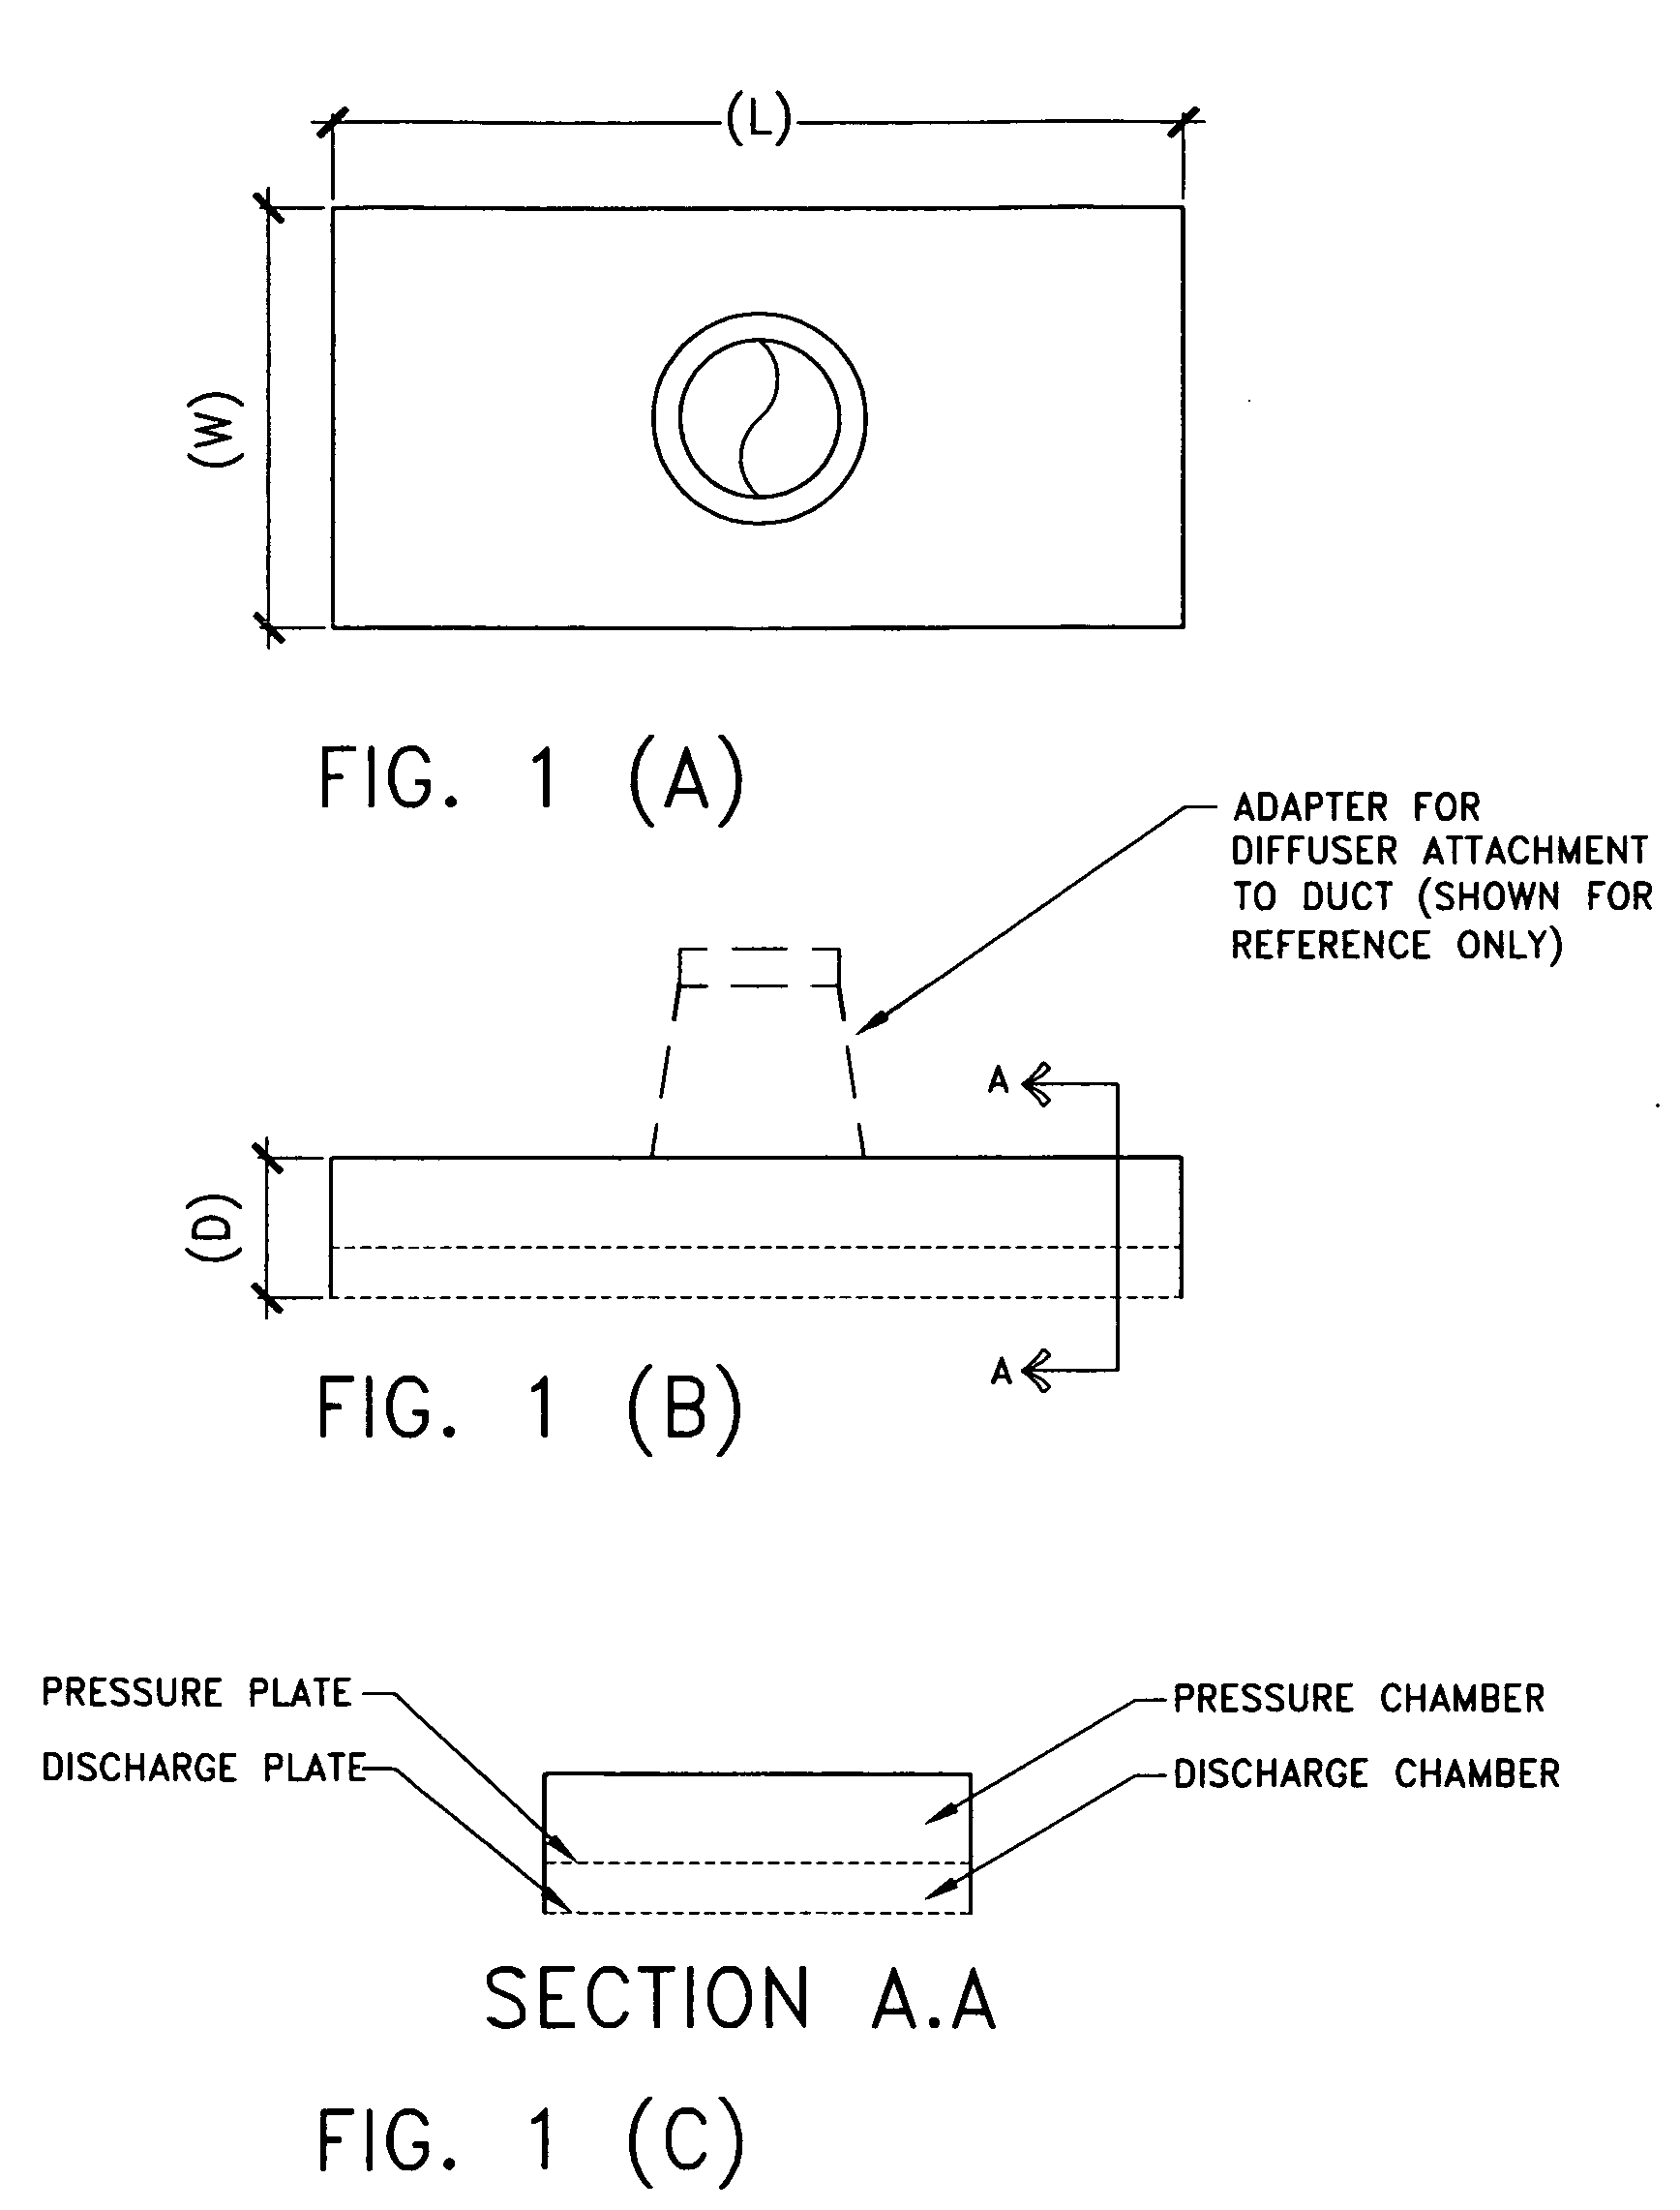 Diffuser assembly for non-turbulent air flow